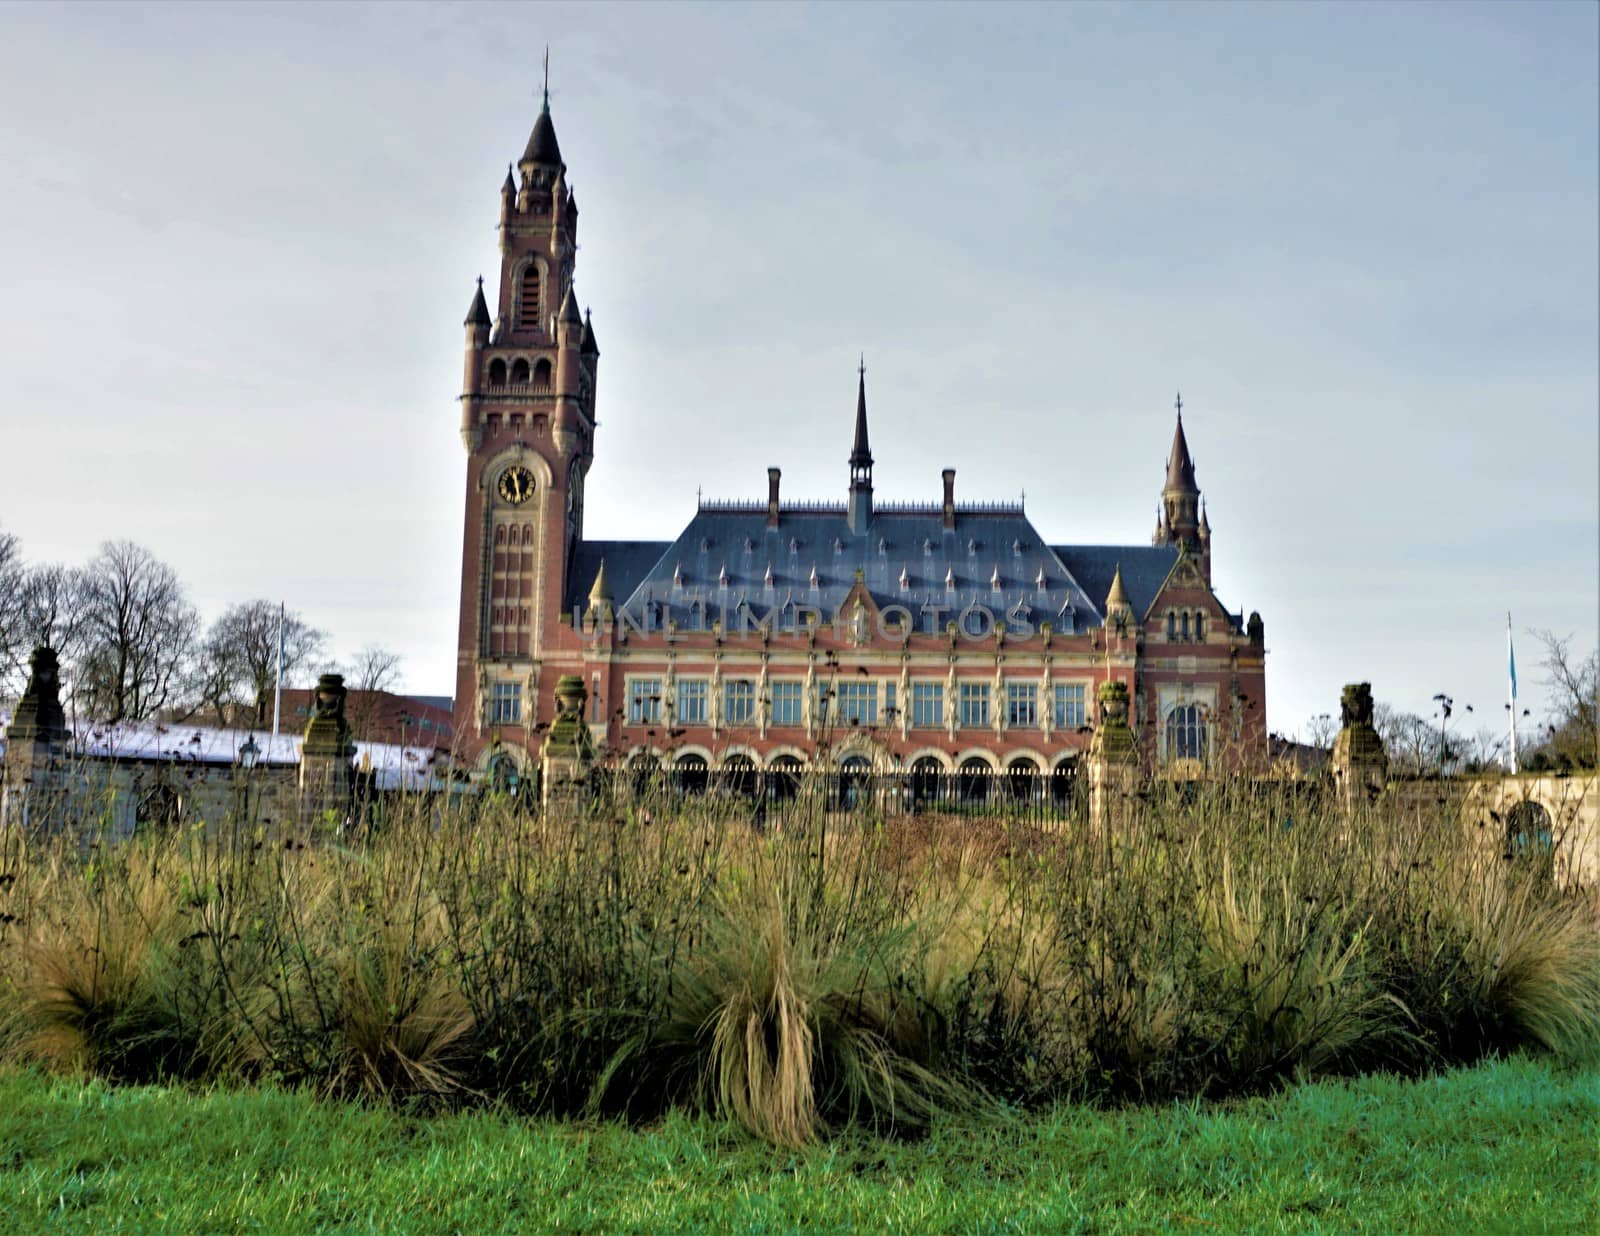 The peace palace in The Hague by pisces2386